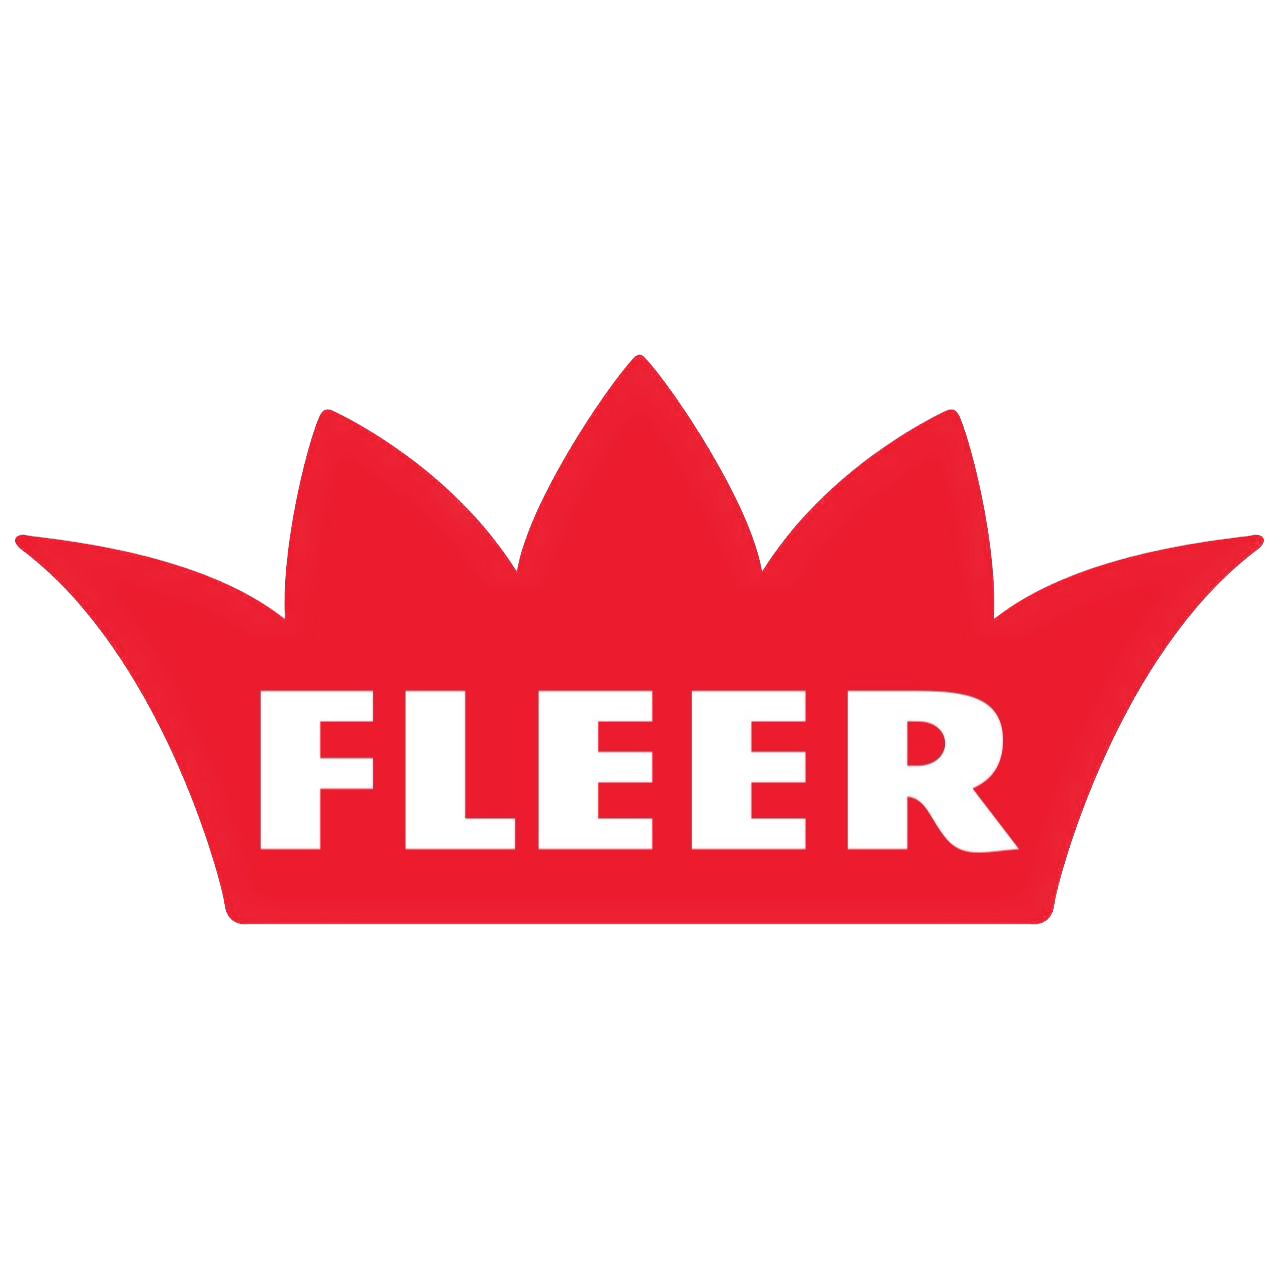 Fleer's classic logo, representing a longstanding tradition of high-quality trading cards and collectibles, available at Generation Strange.